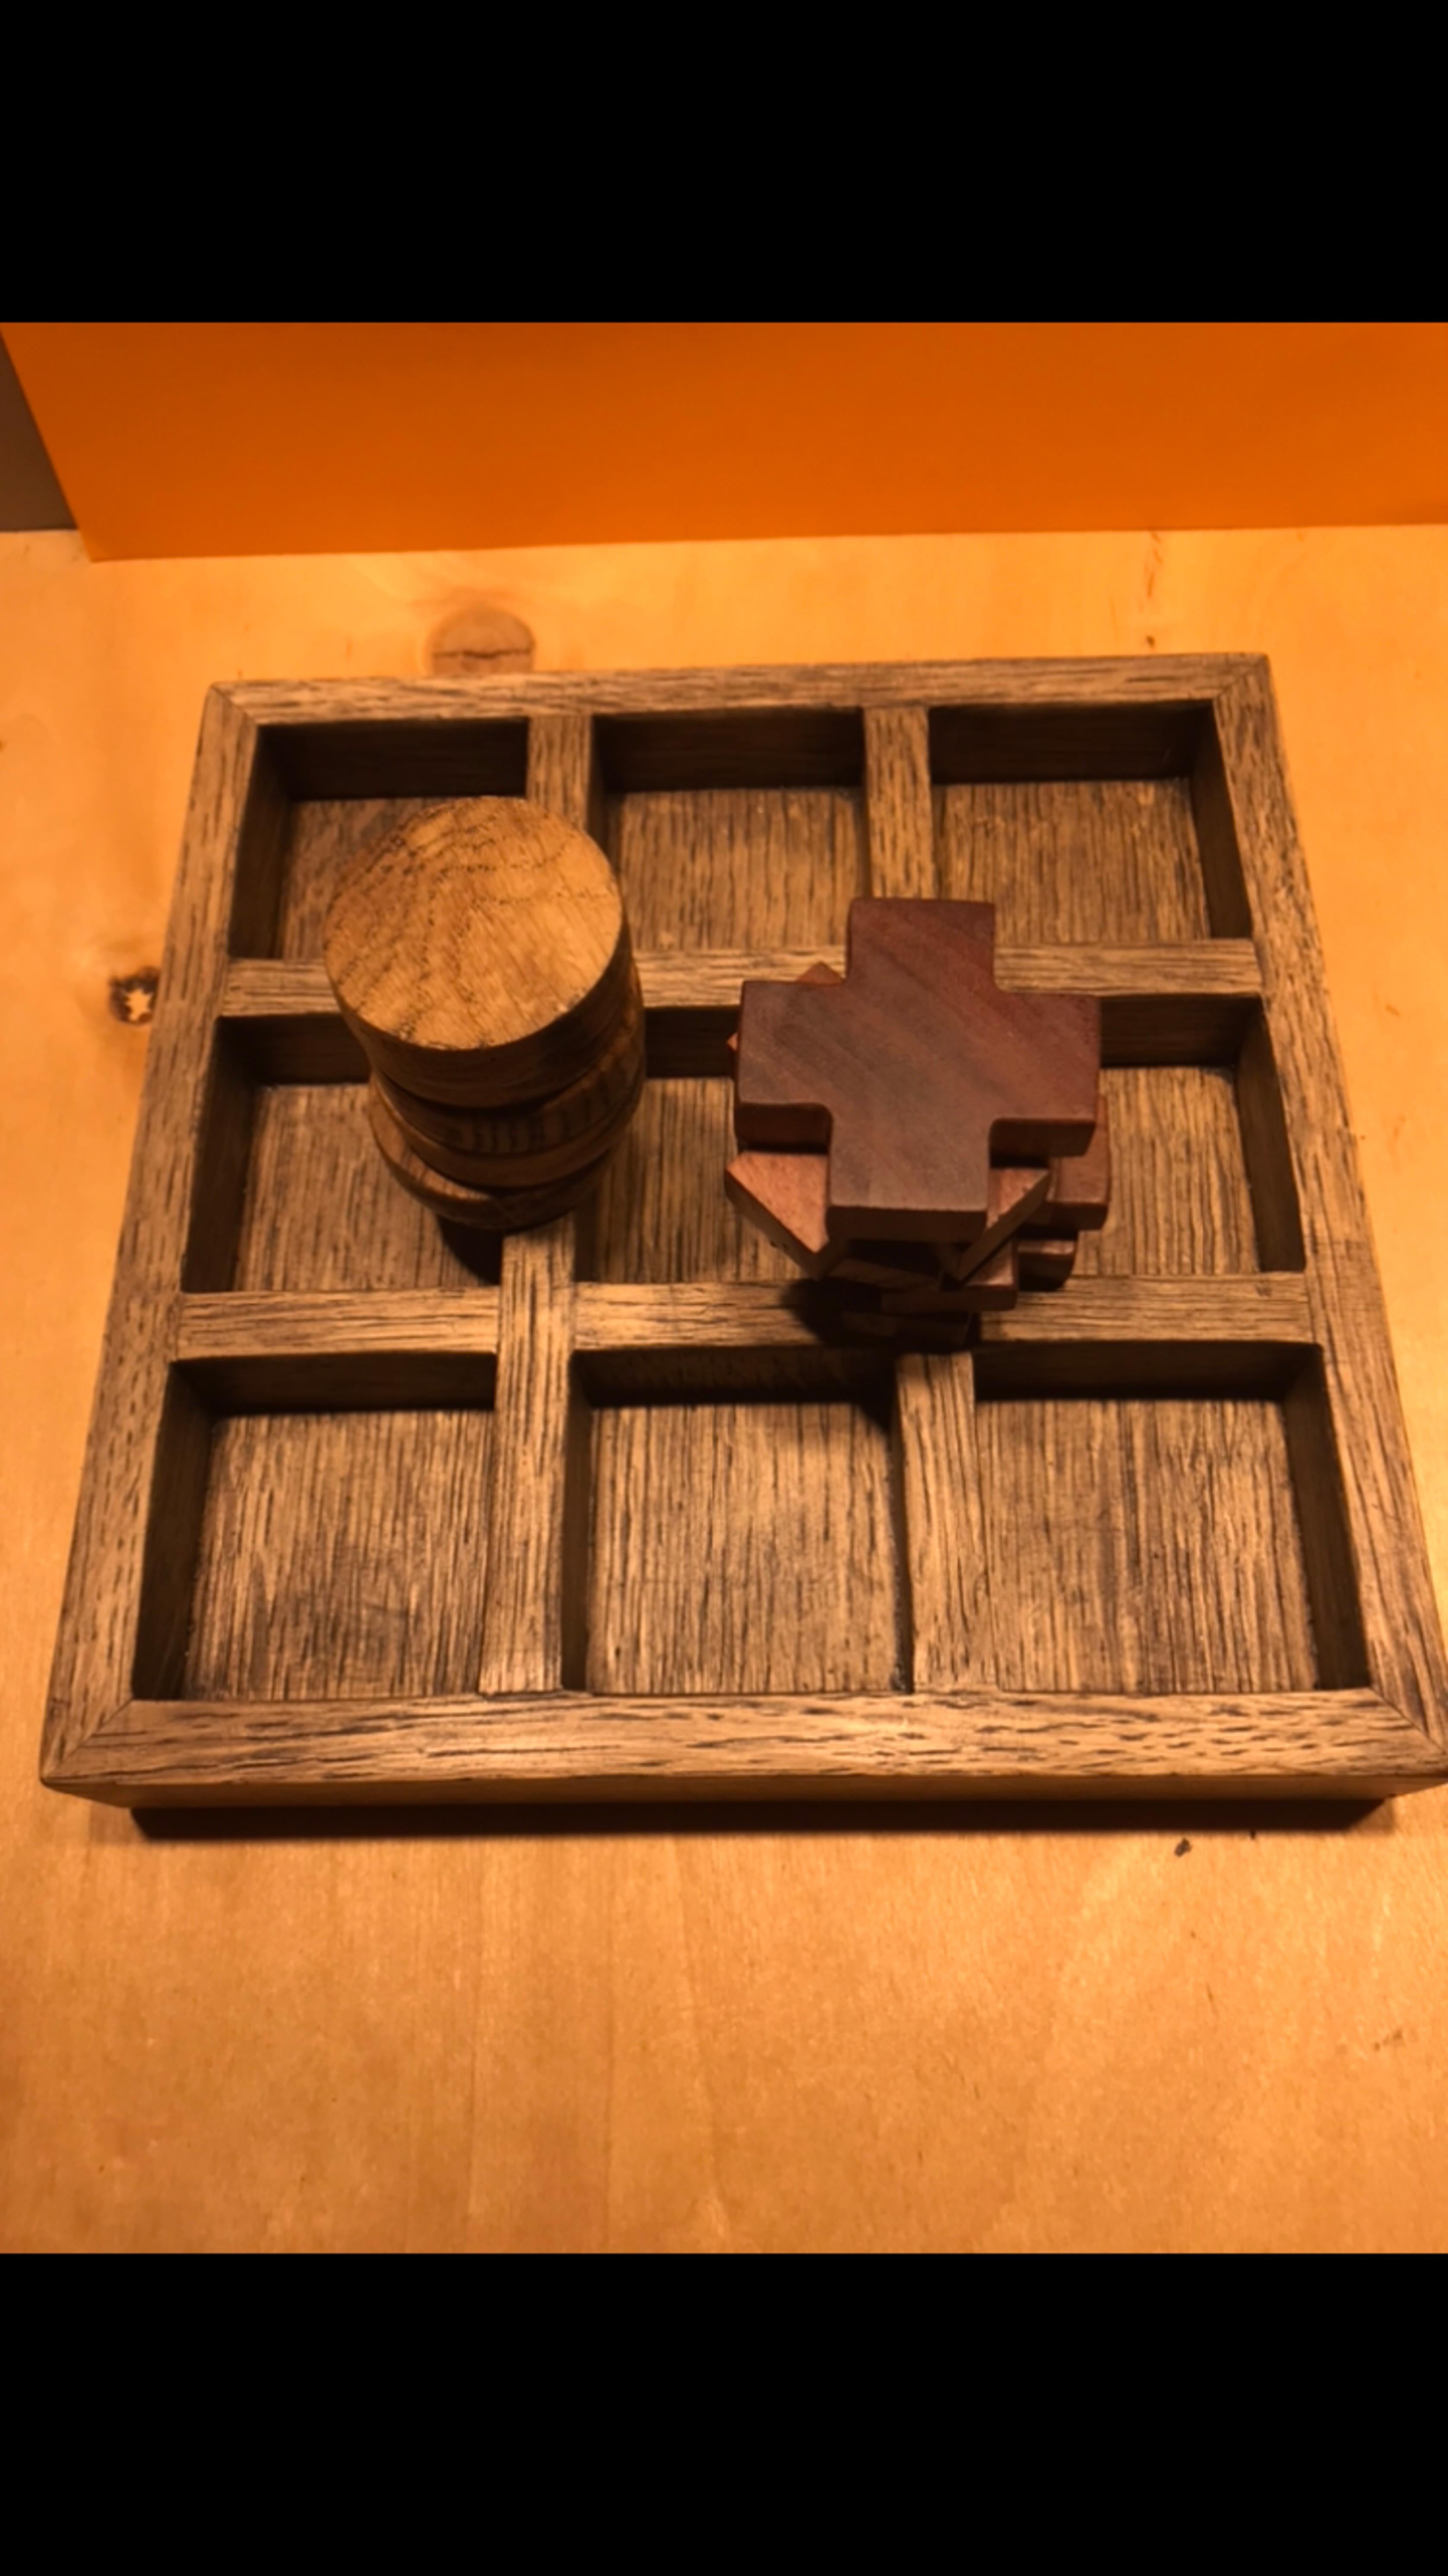 The board game tic-tac-toe is made by hand, the board is made using white oak veneer, the toes are entirely made of oak, the crosses are made of mango wood, and the board and game elements are coated with oil